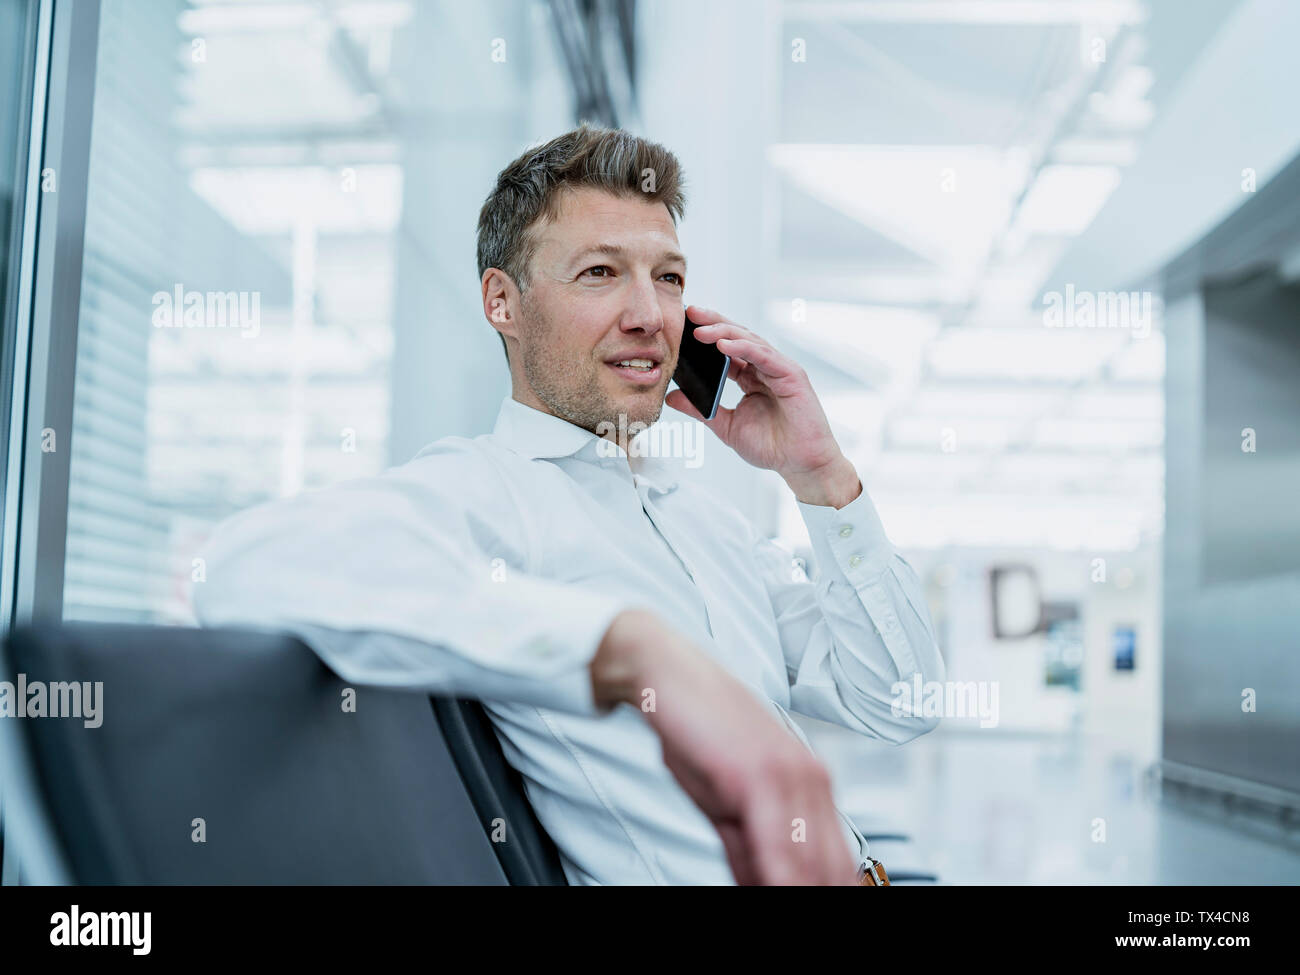 Businessman sitting in waiting area talking on cell phone Stock Photo